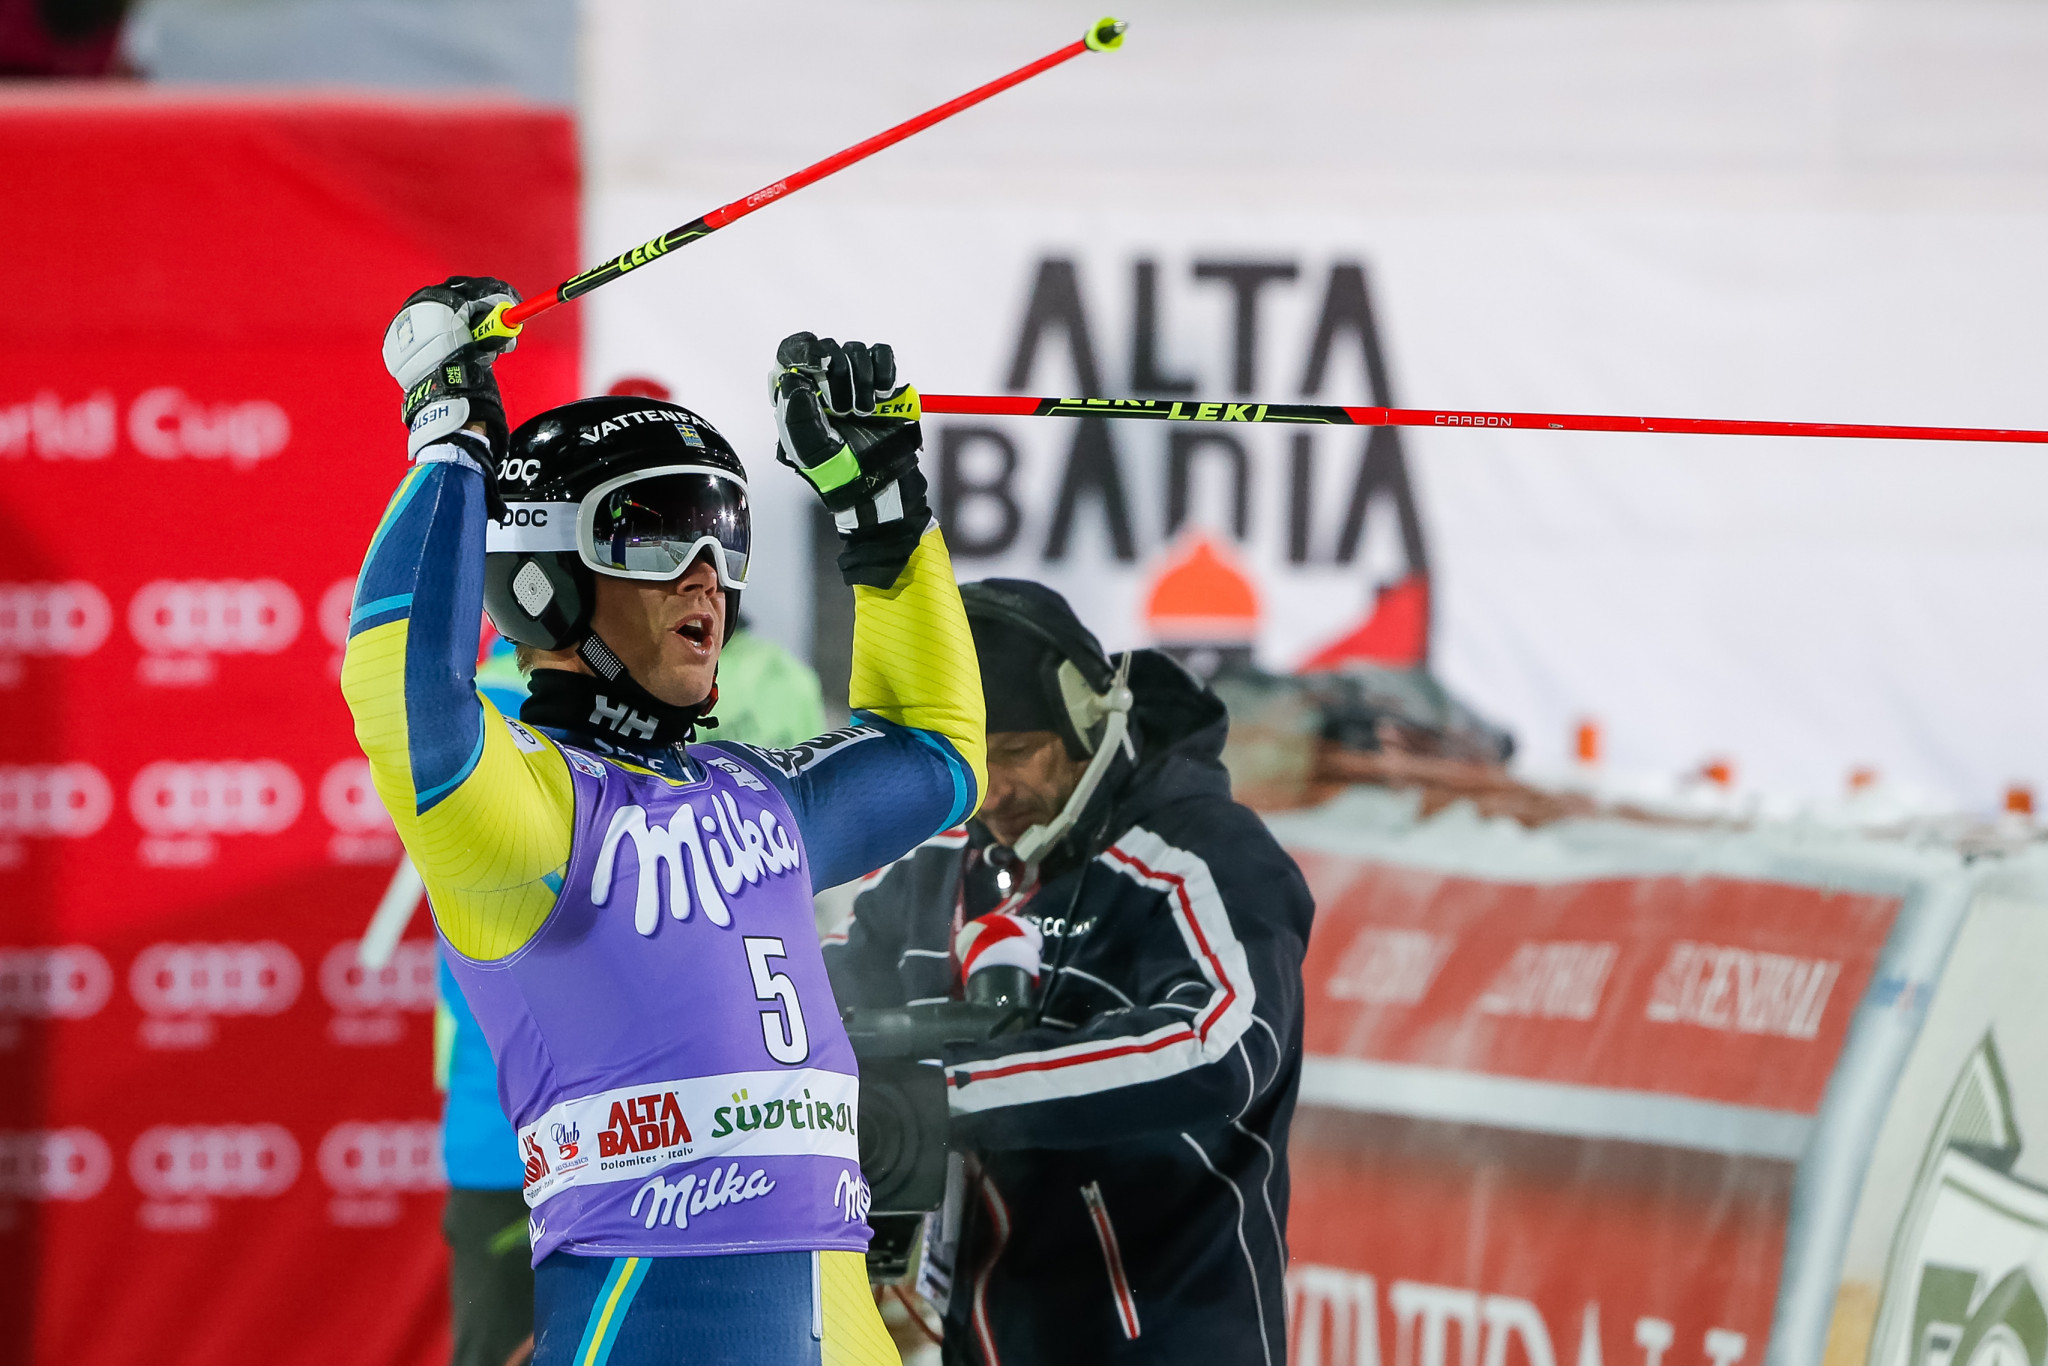 Olsson claims surprise win at FIS Alpine World Cup in Alta Badia